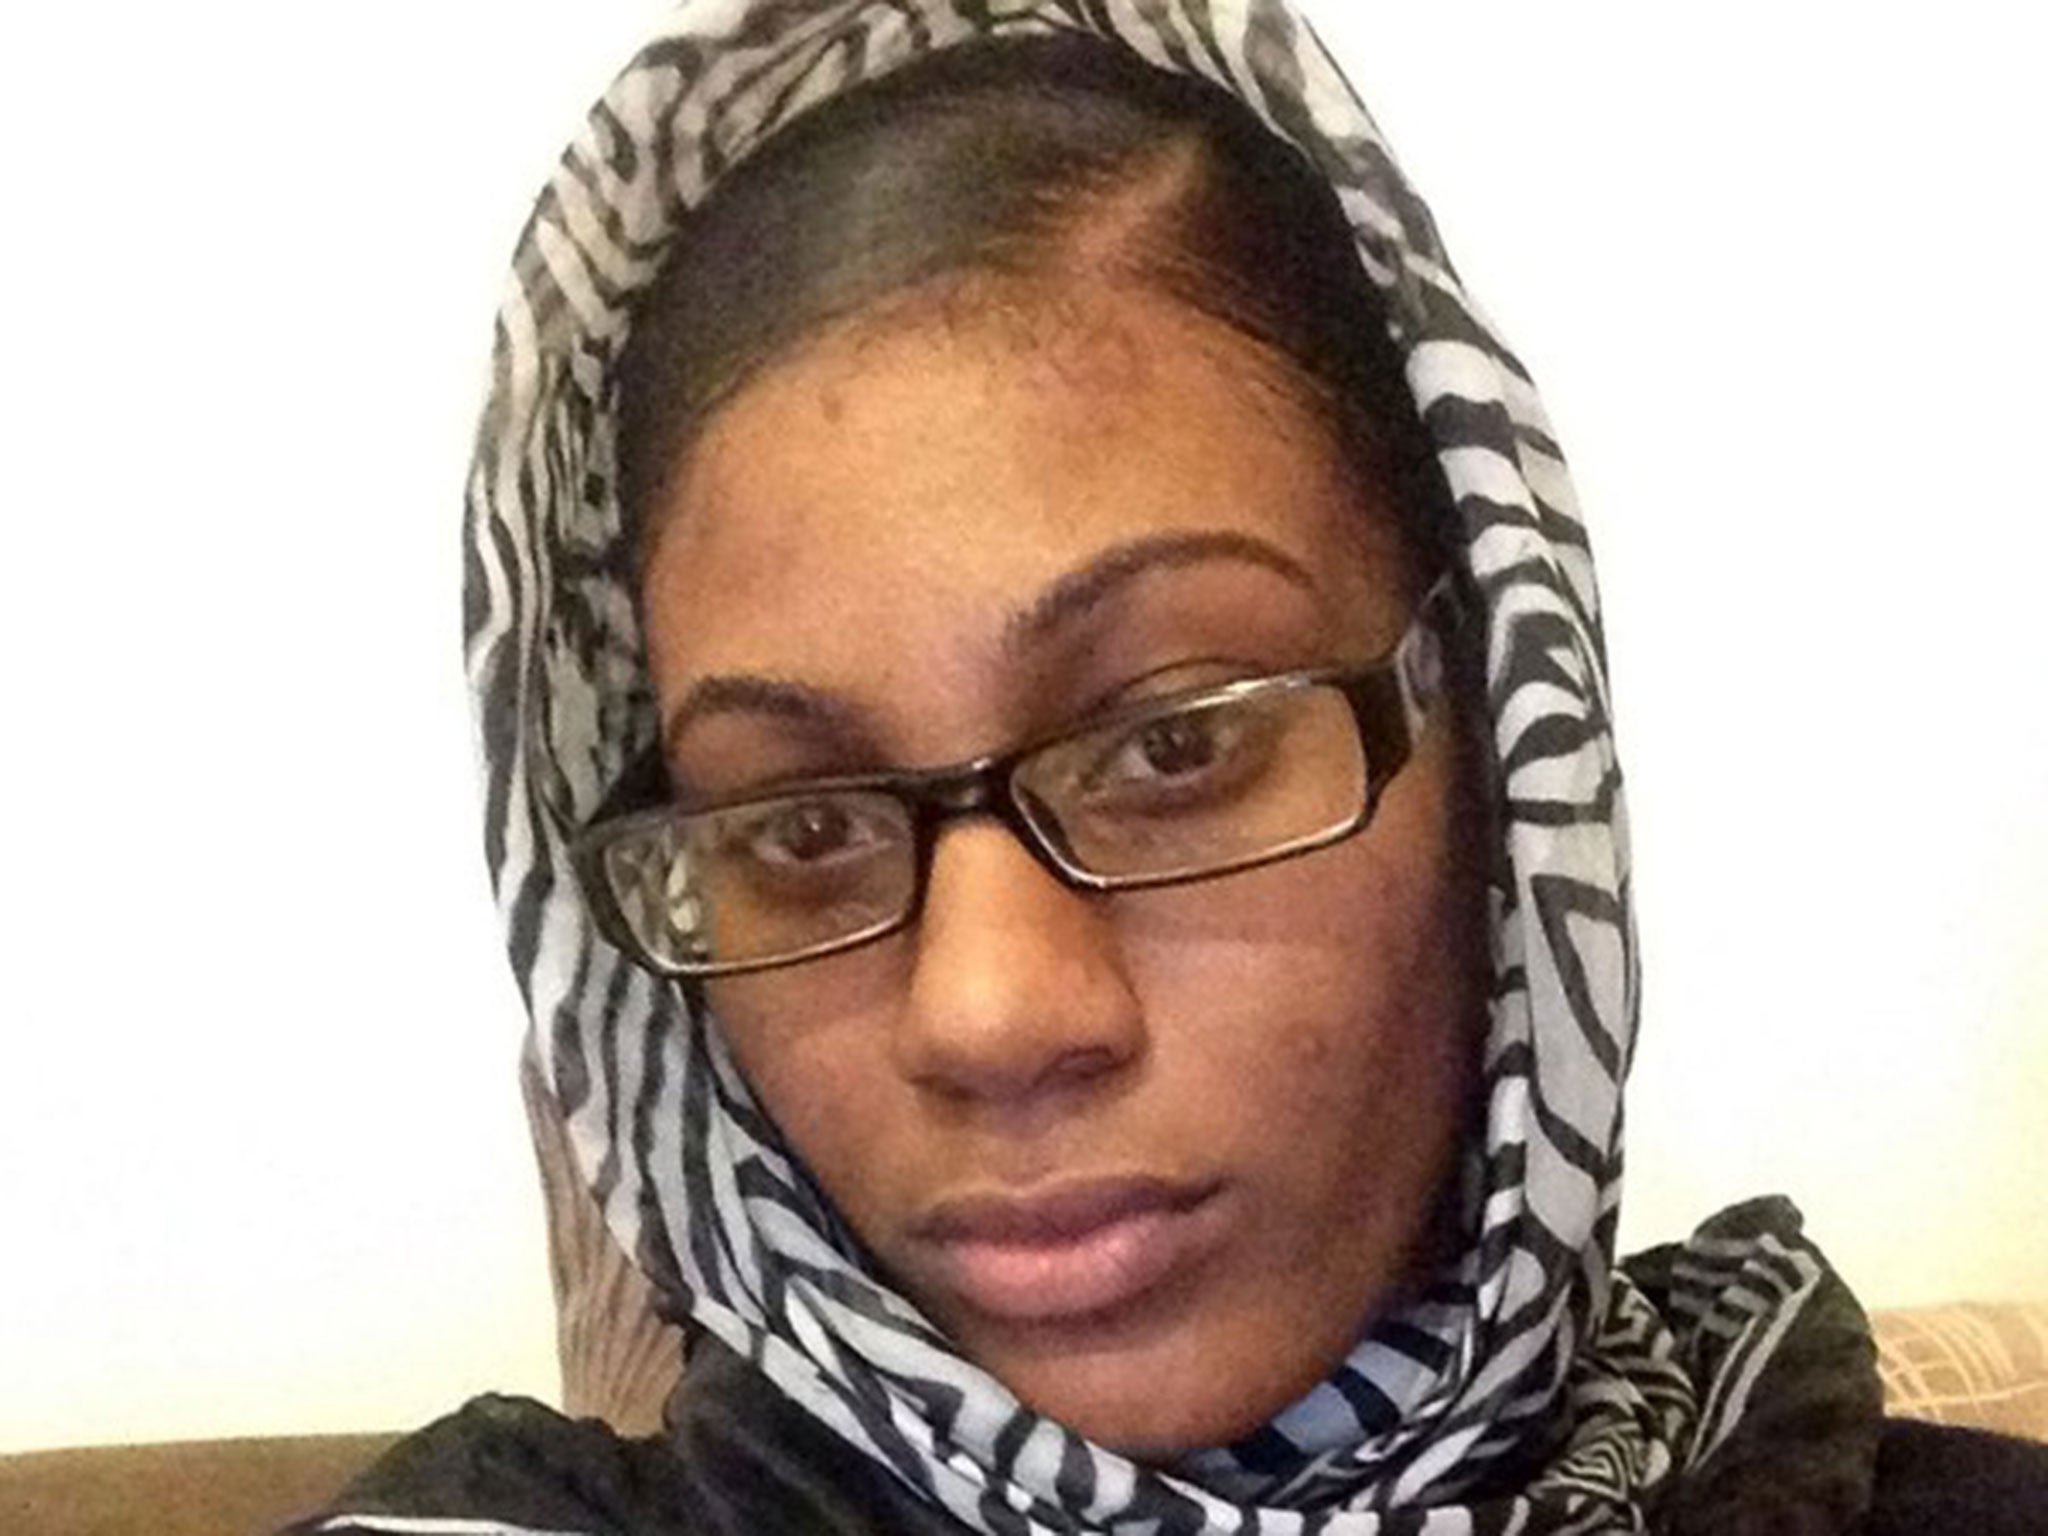 Jamila Henry stole her sister's passport in order to travel to Syria